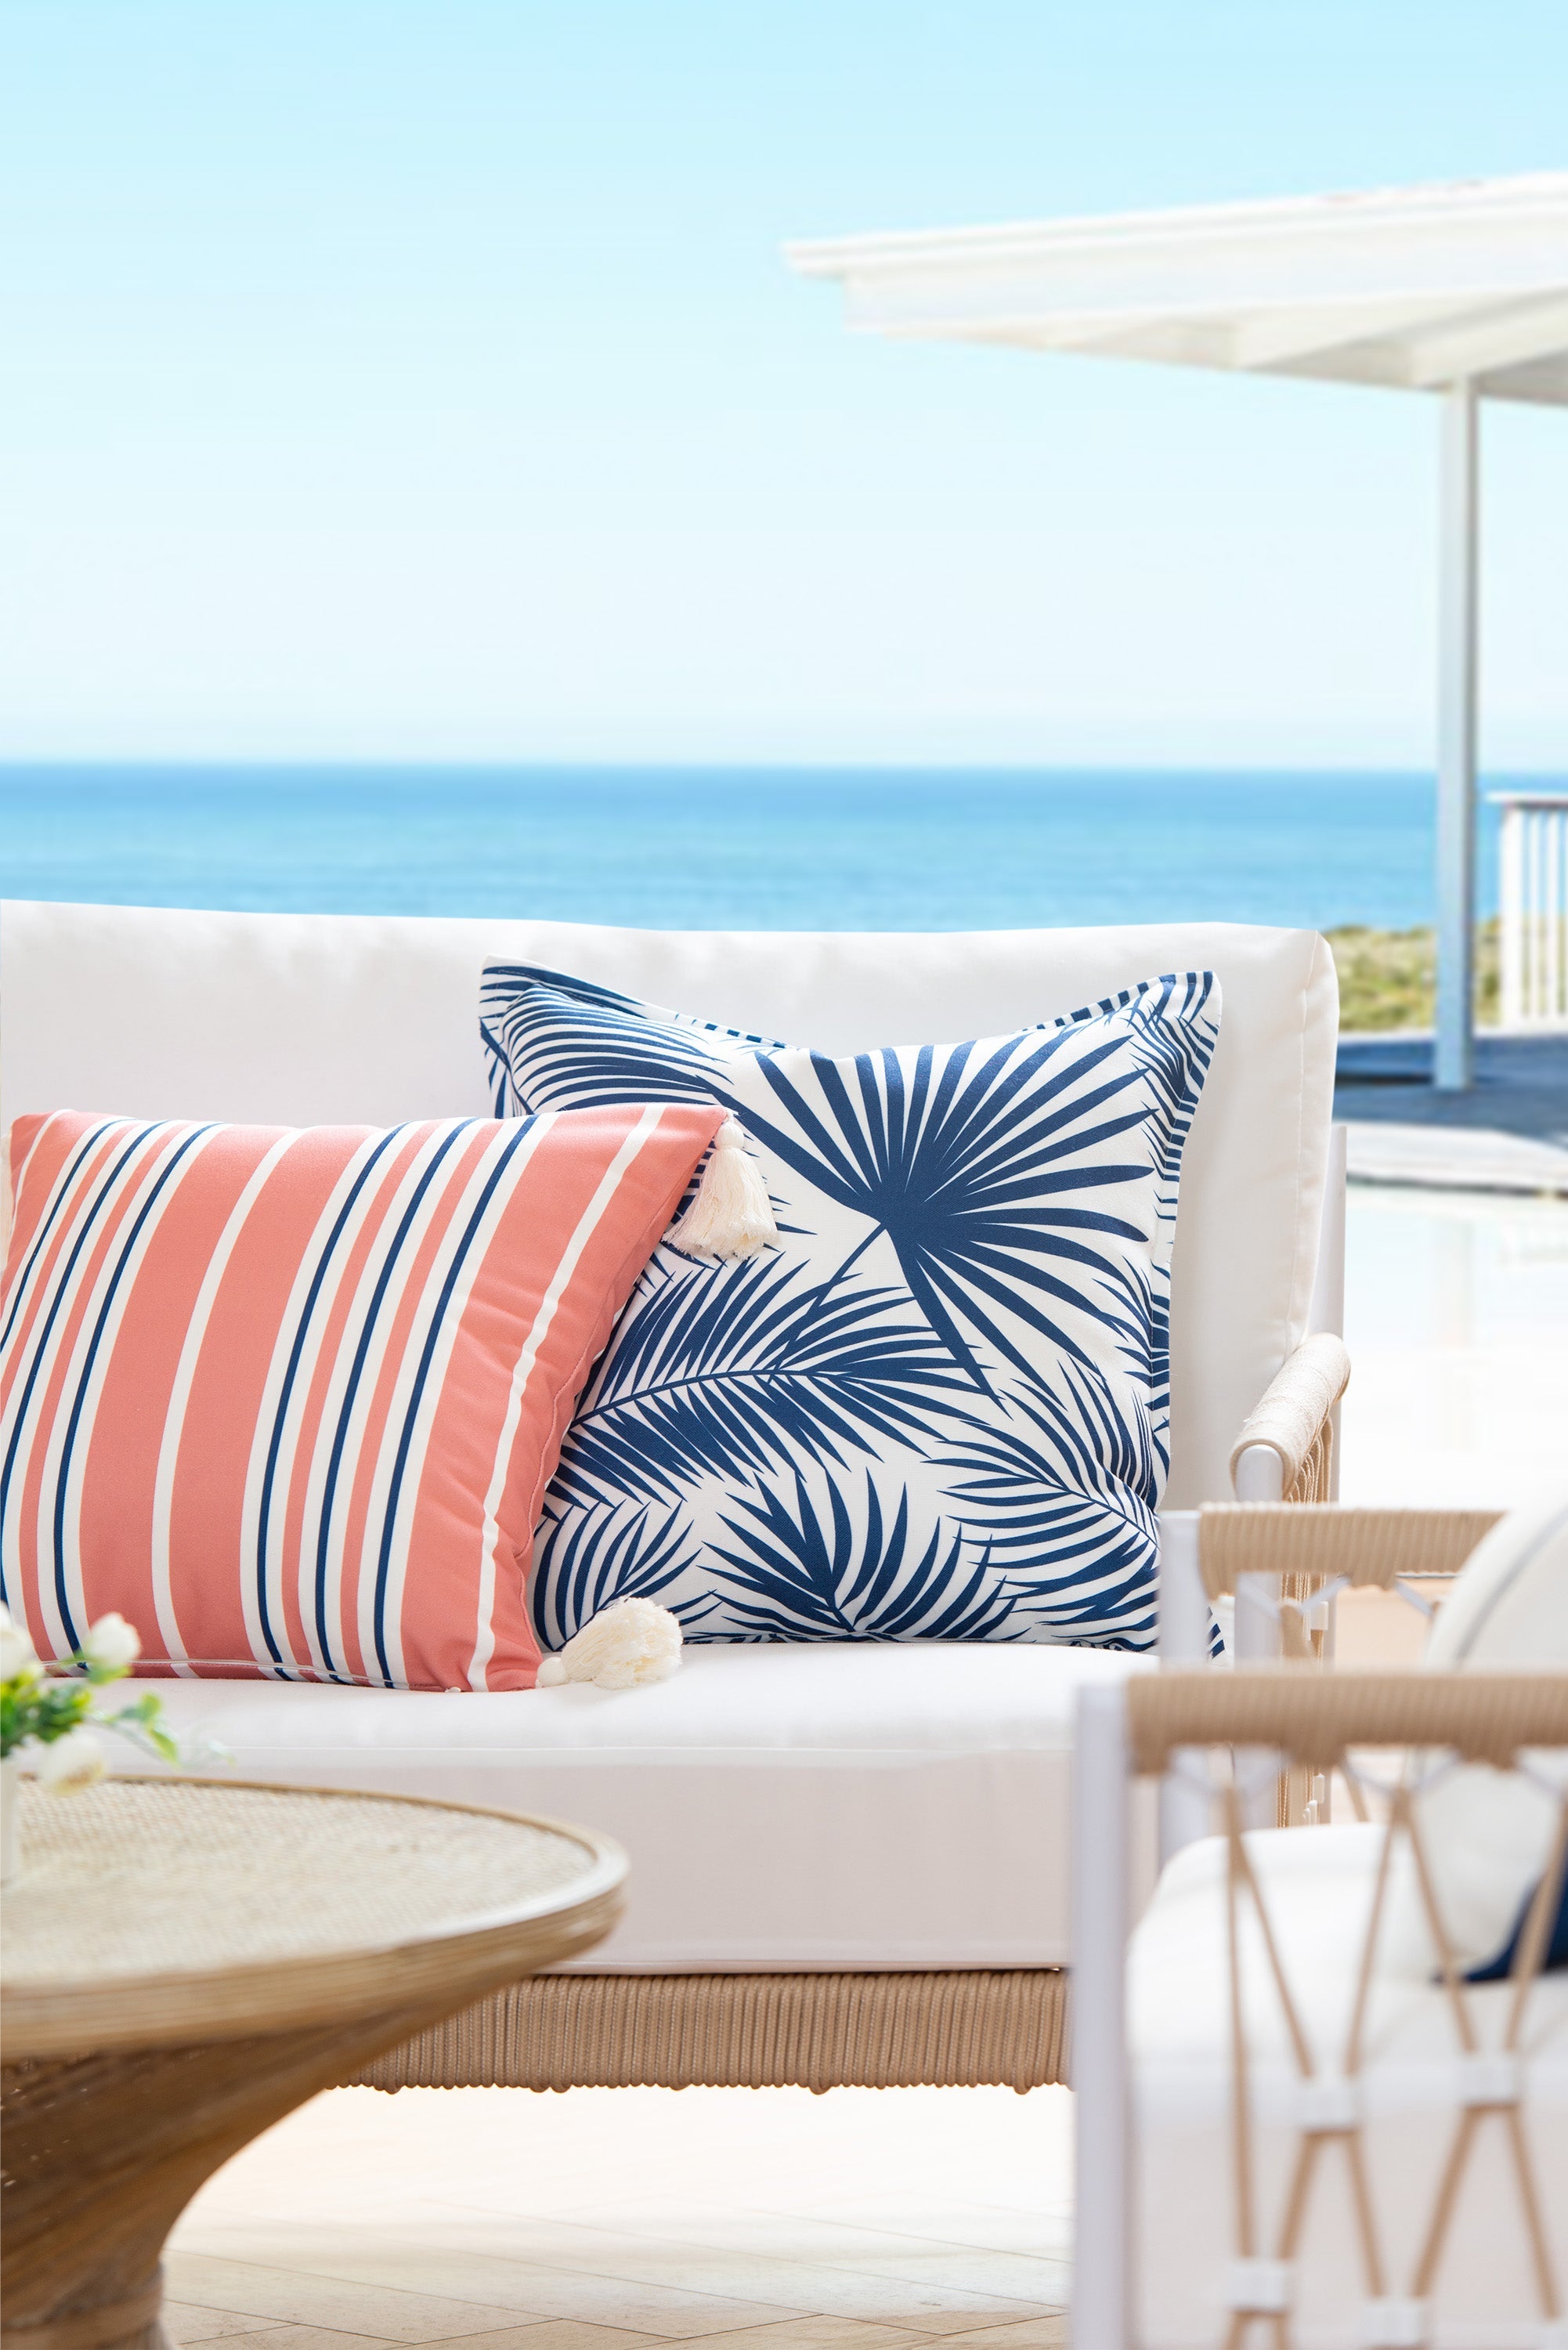 Coastal Indoor Outdoor Throw Pillow Cover, Stripe Tassel, Coral Pink Navy Blue, 18"x18"-1